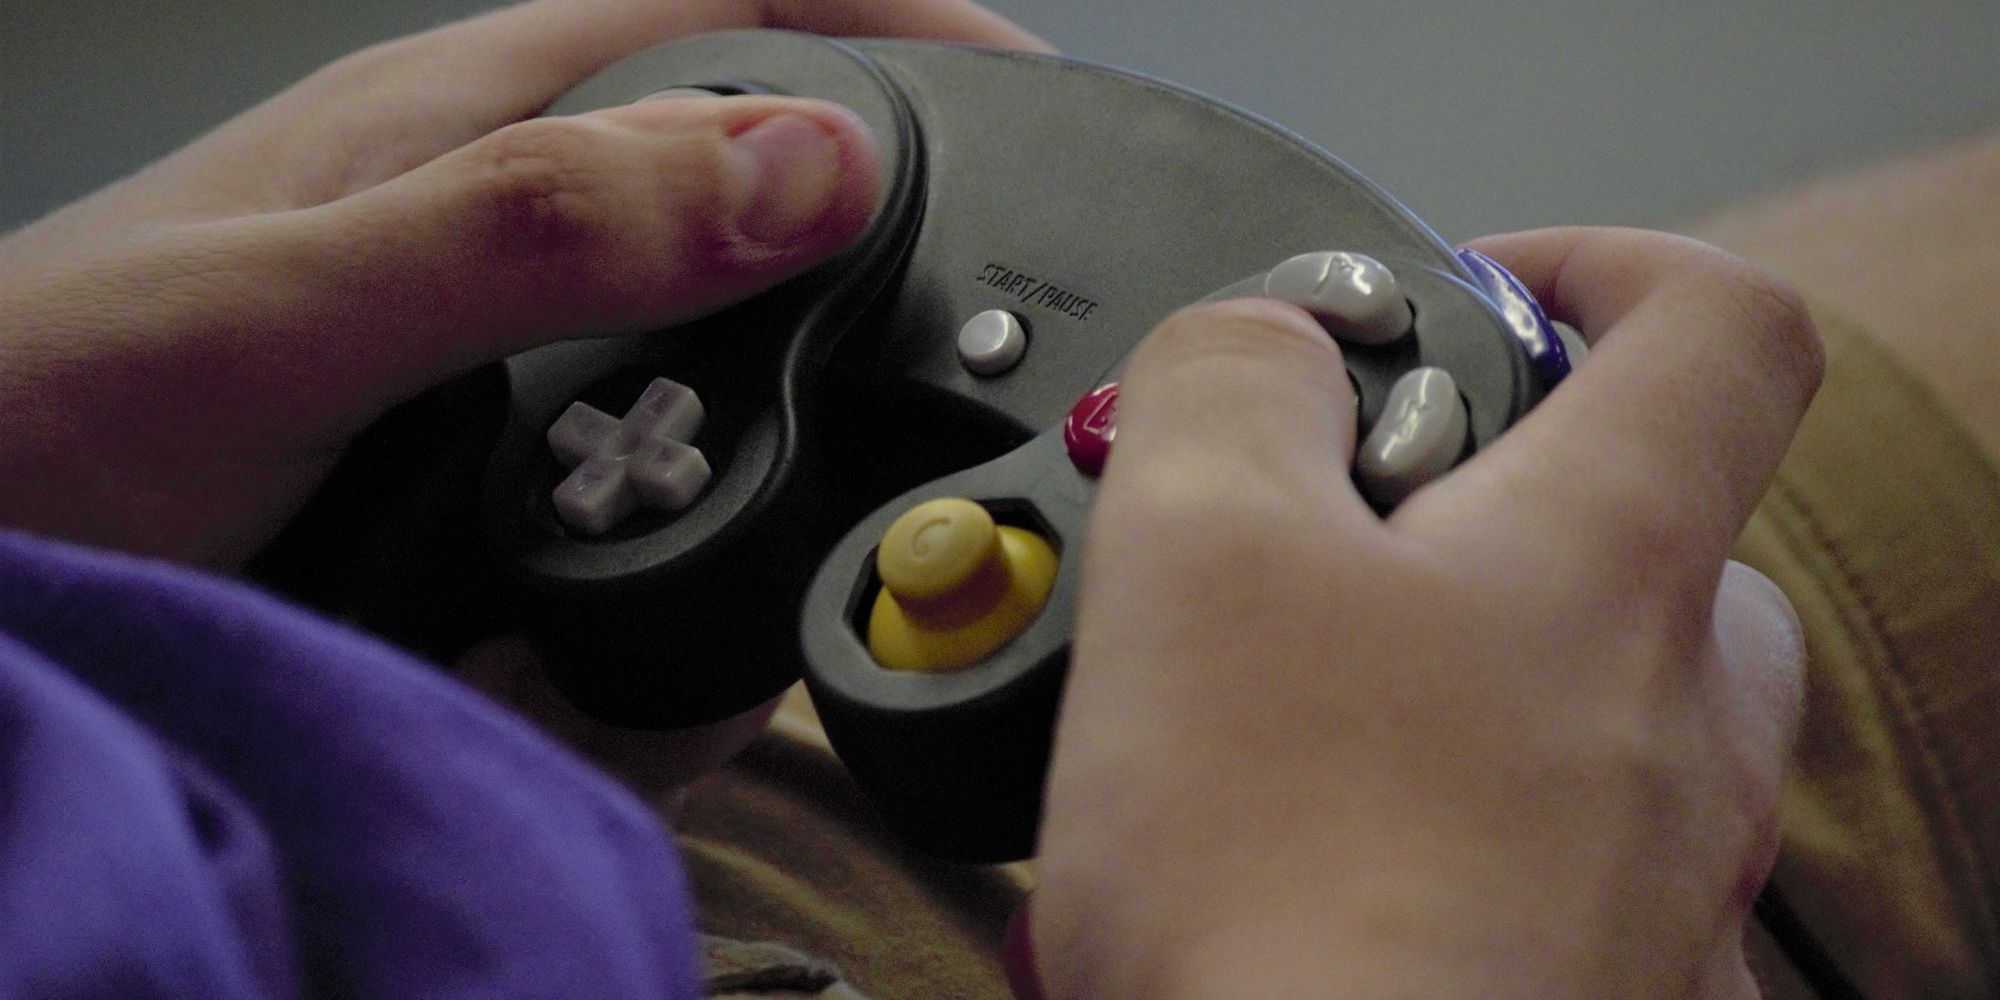 A player holding the GameCube controller